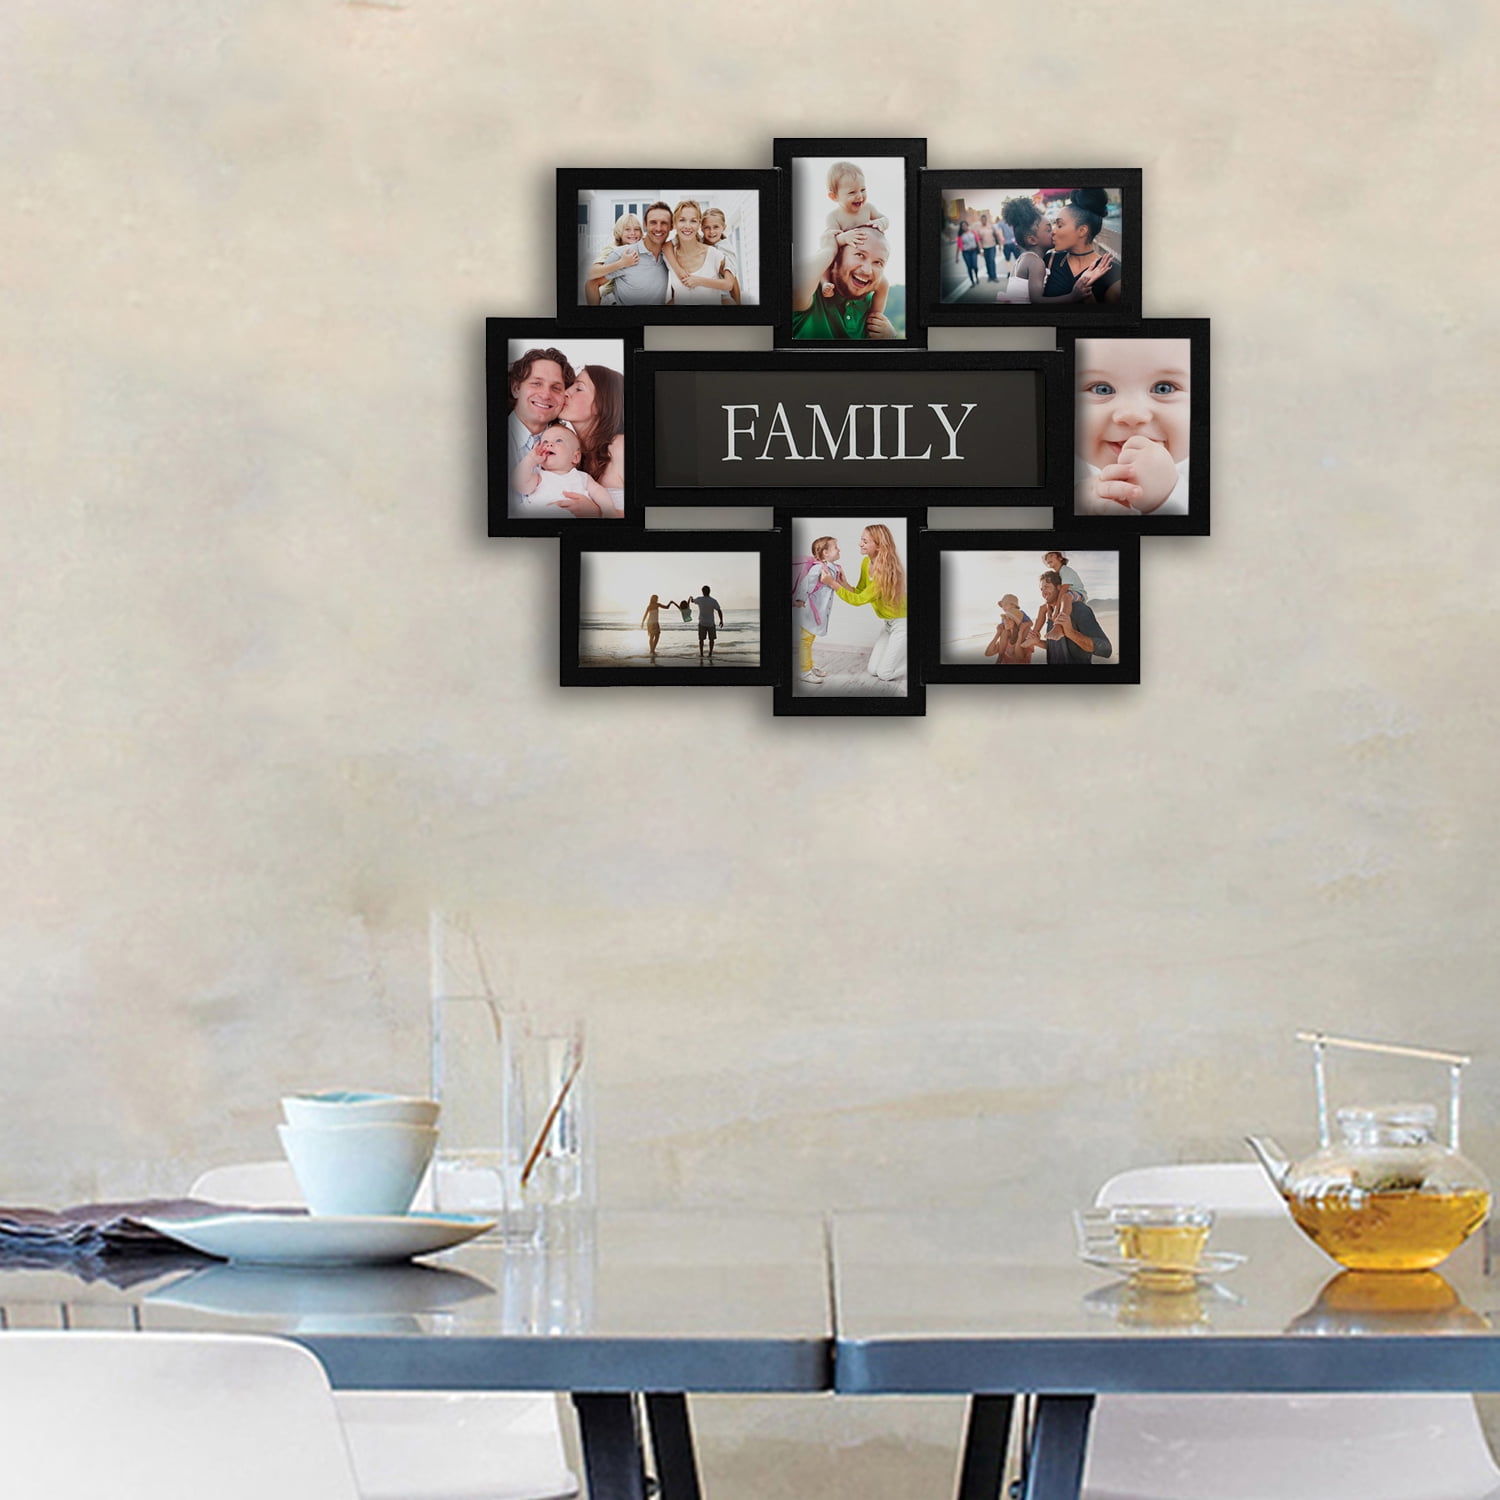 MELANNCO 7 Opening Collage Frame- Displays Four 6x4 and Three 6x4 Inch  Photos, 22.8x22.8 Inch.